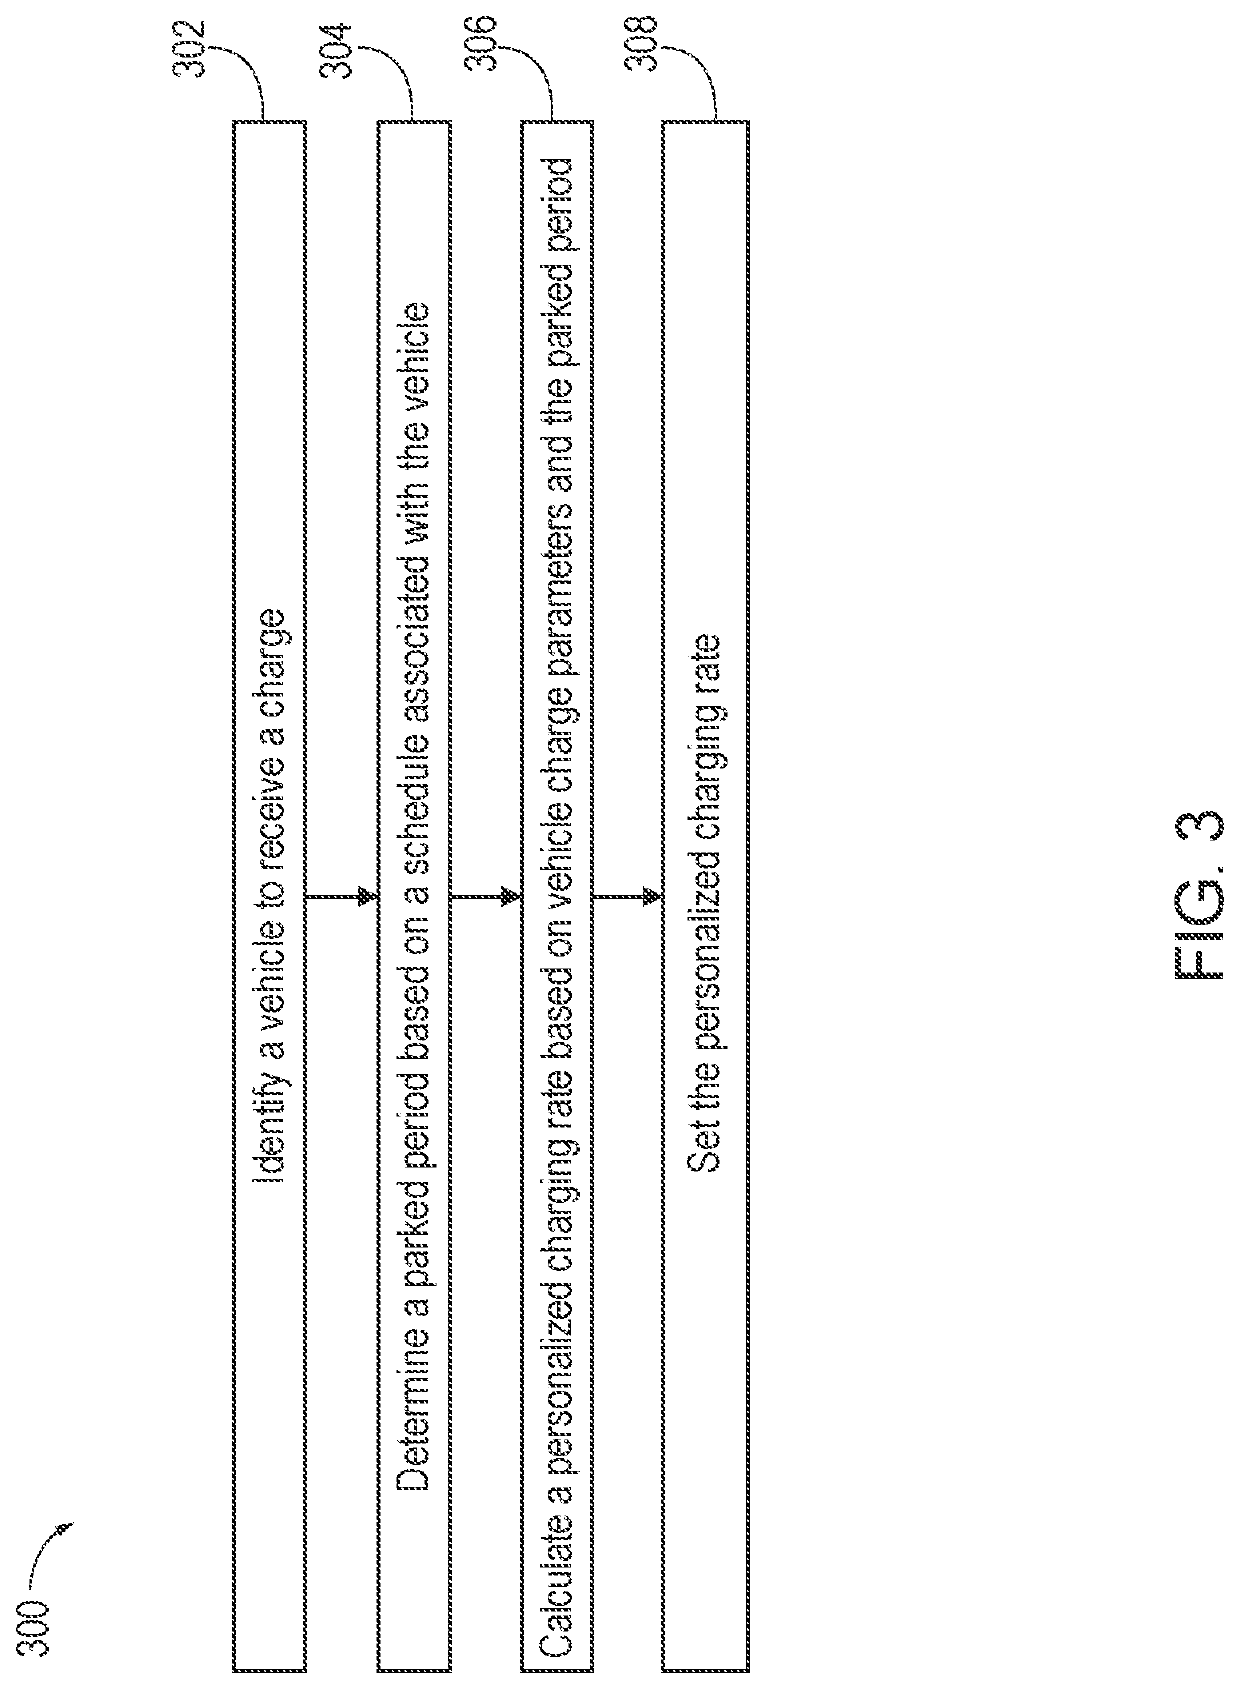 Systems and methods for providing a personalized charging rate